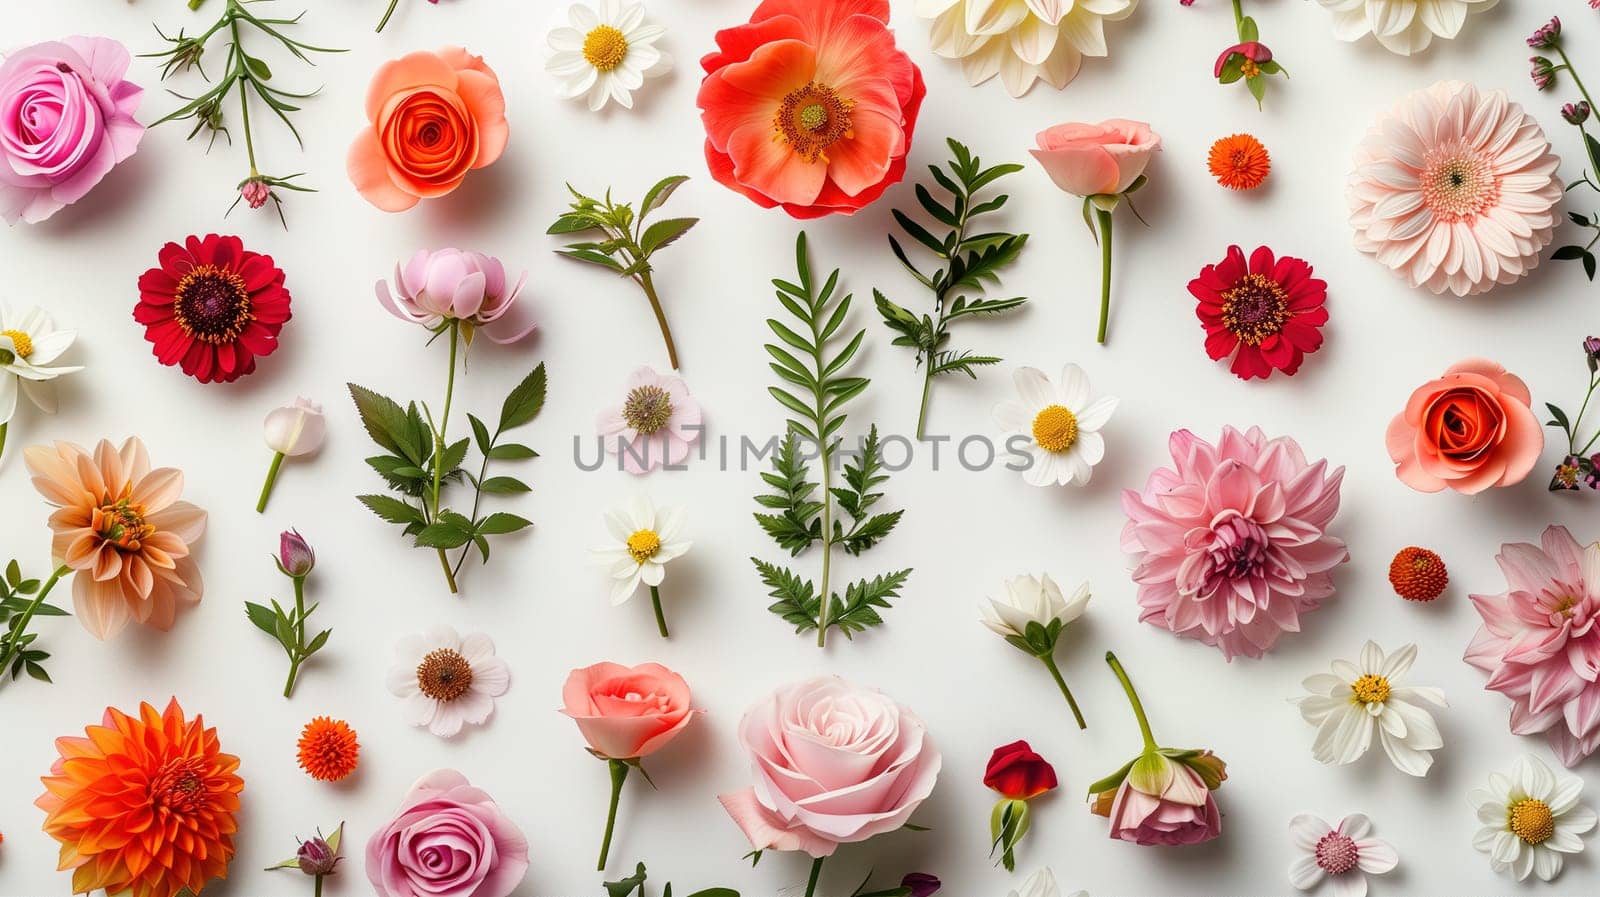 A collection of diverse, bright flowers and greenery is spread out in a decorative pattern, presumably as part of the decor for an International Mothers Day concert celebration. The assortment presents a variety of textures and tones, evoking a festive and appreciative mood to honor mothers worldwide.